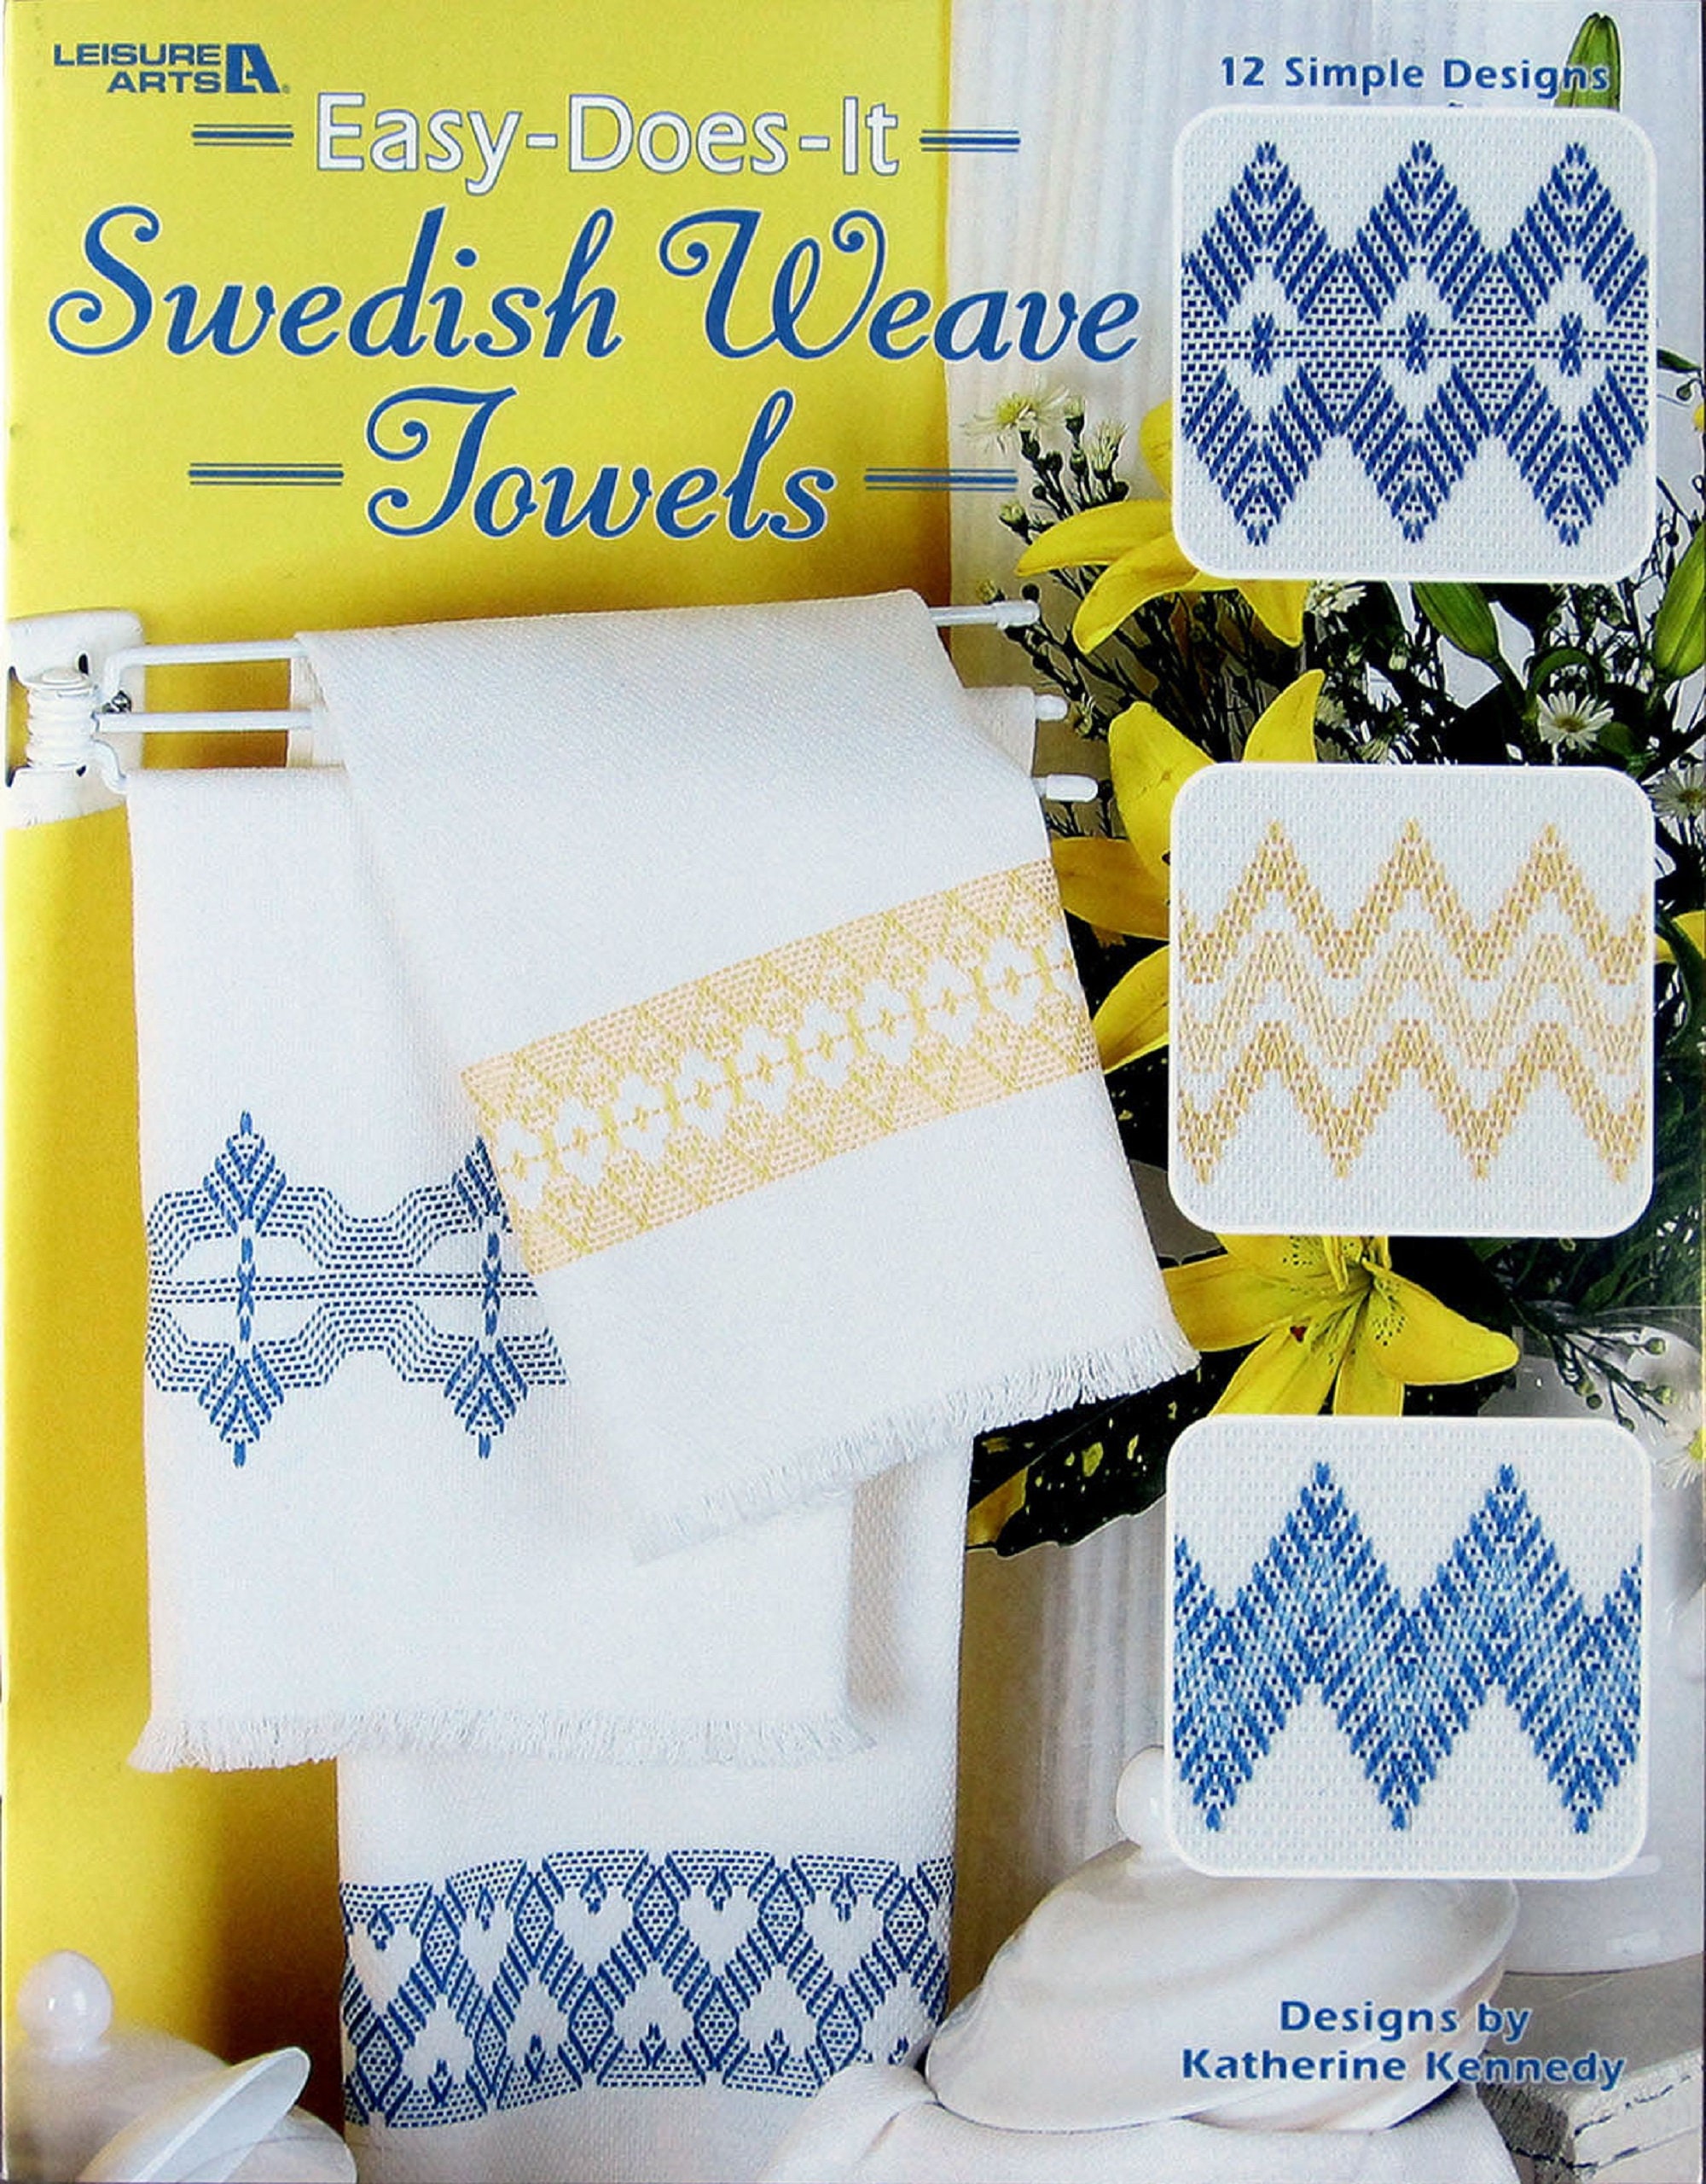 Huck Cleaning Towels: 16 x 26, Color Options, Cotton (Huck Weave